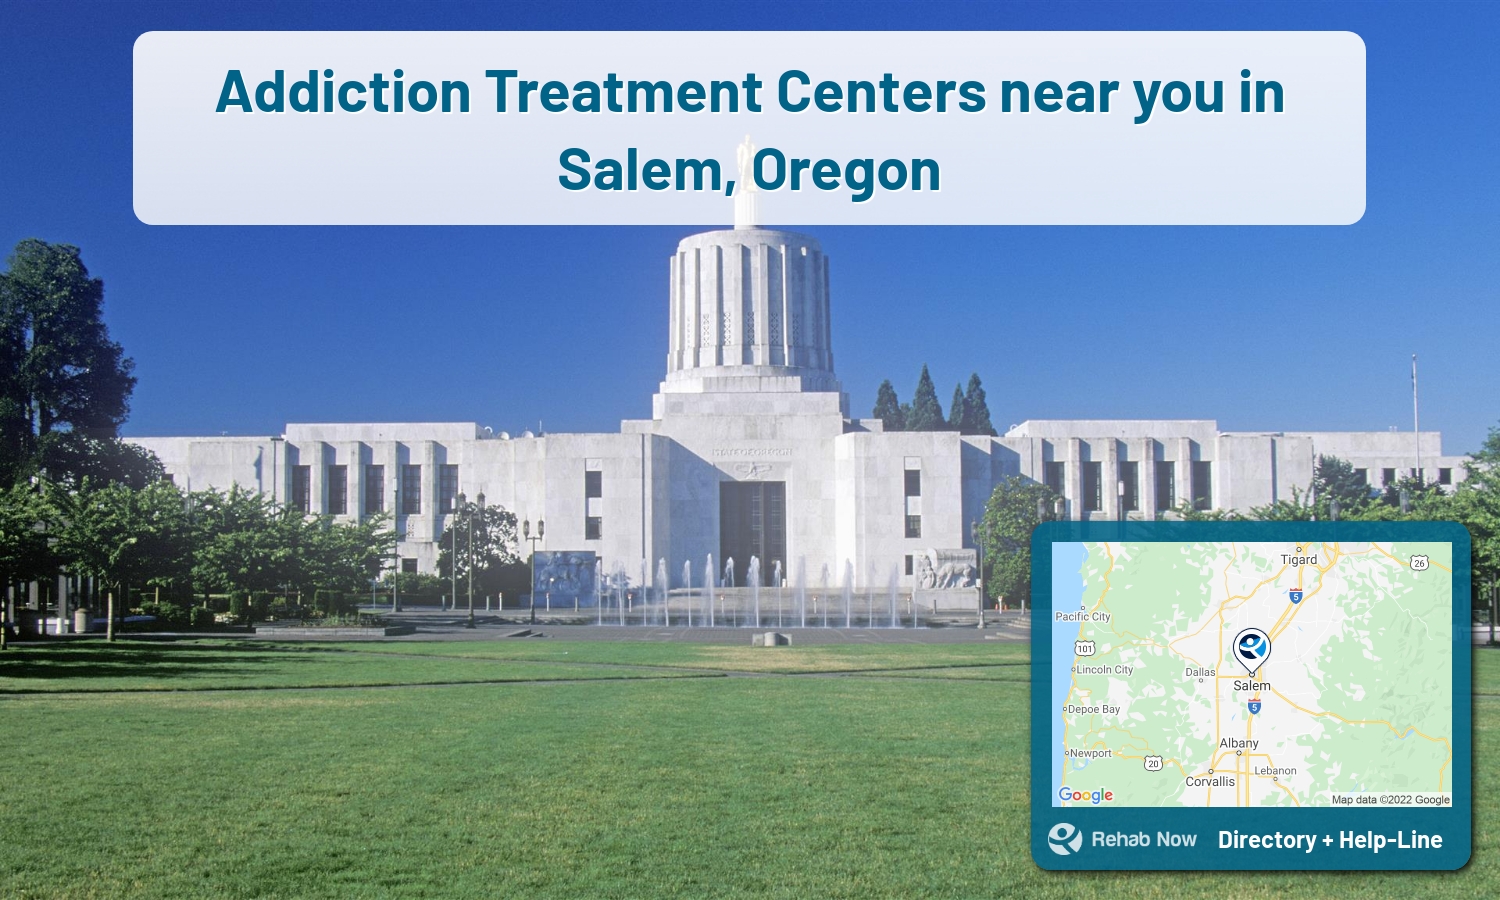 Salem, OR Treatment Centers. Find drug rehab in Salem, Oregon, or detox and treatment programs. Get the right help now!